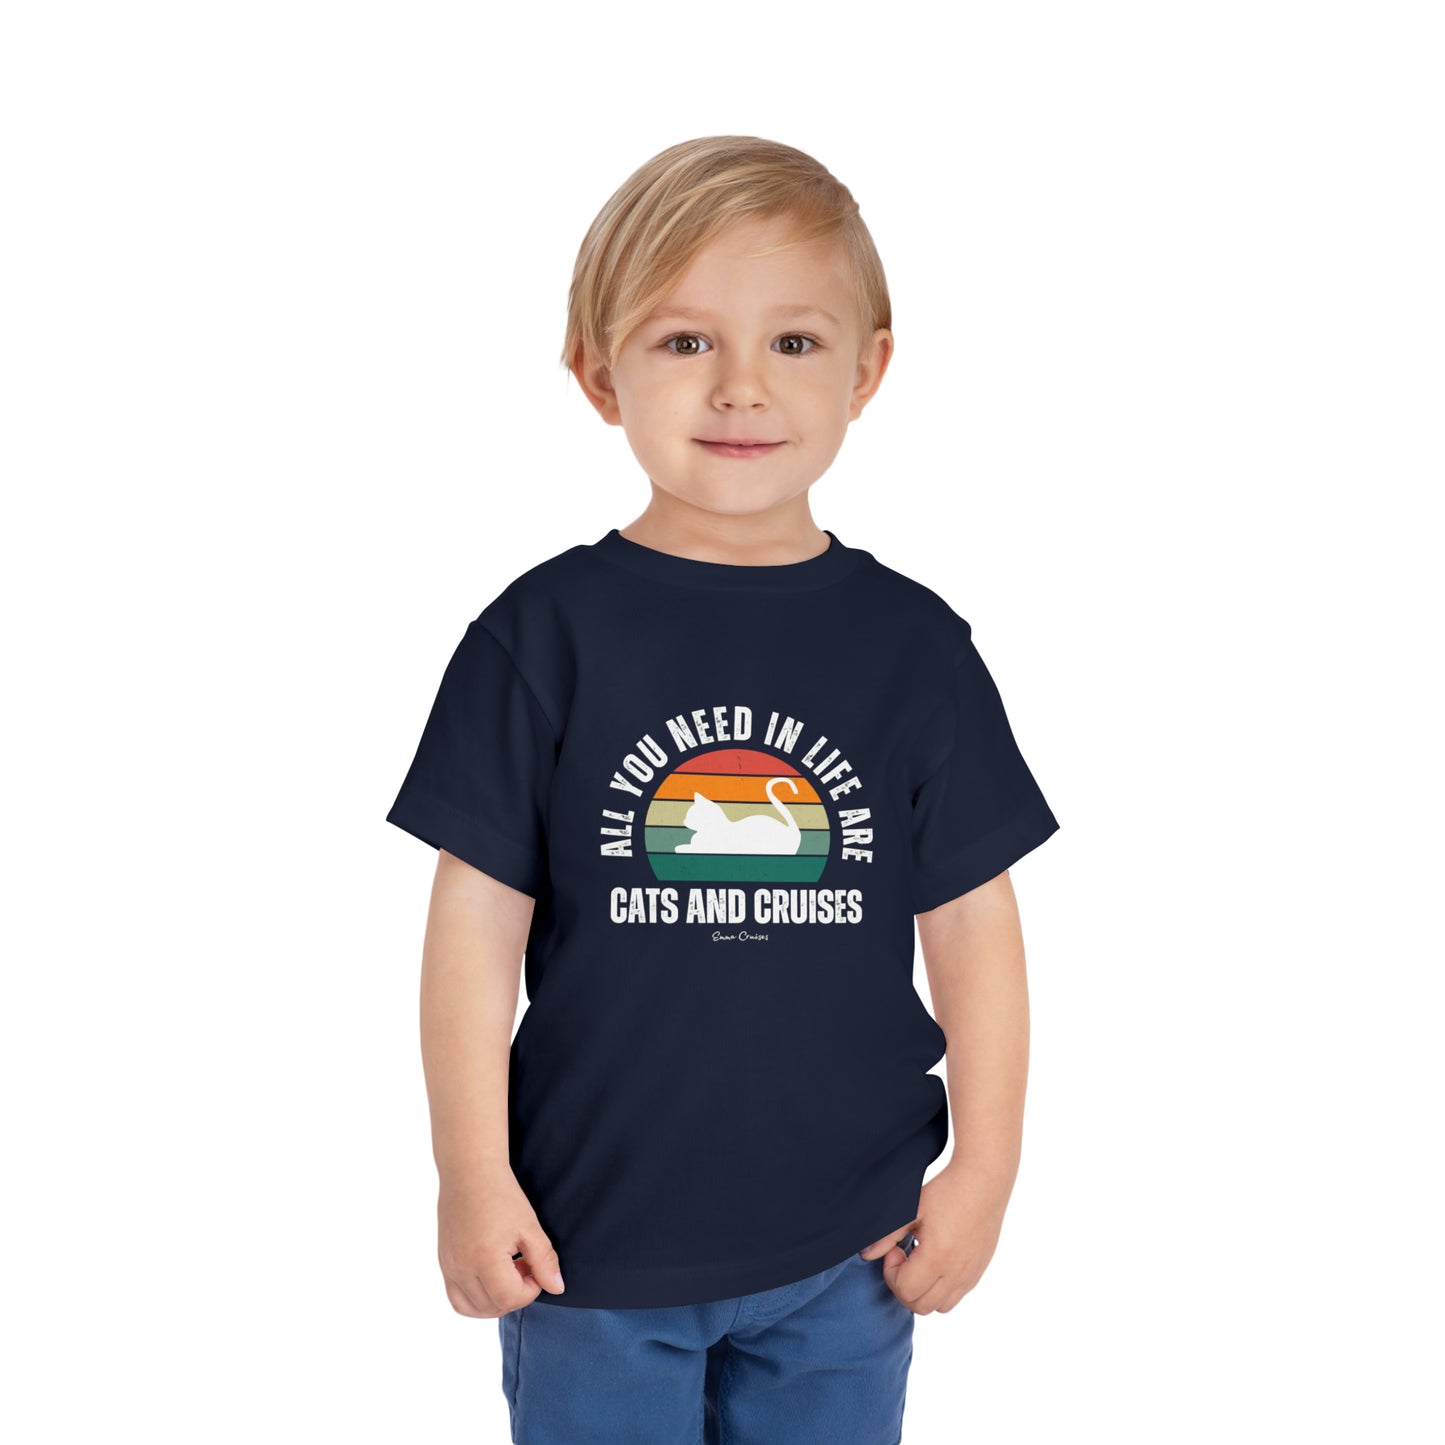 Cats and Cruises - Toddler UNISEX T-Shirt